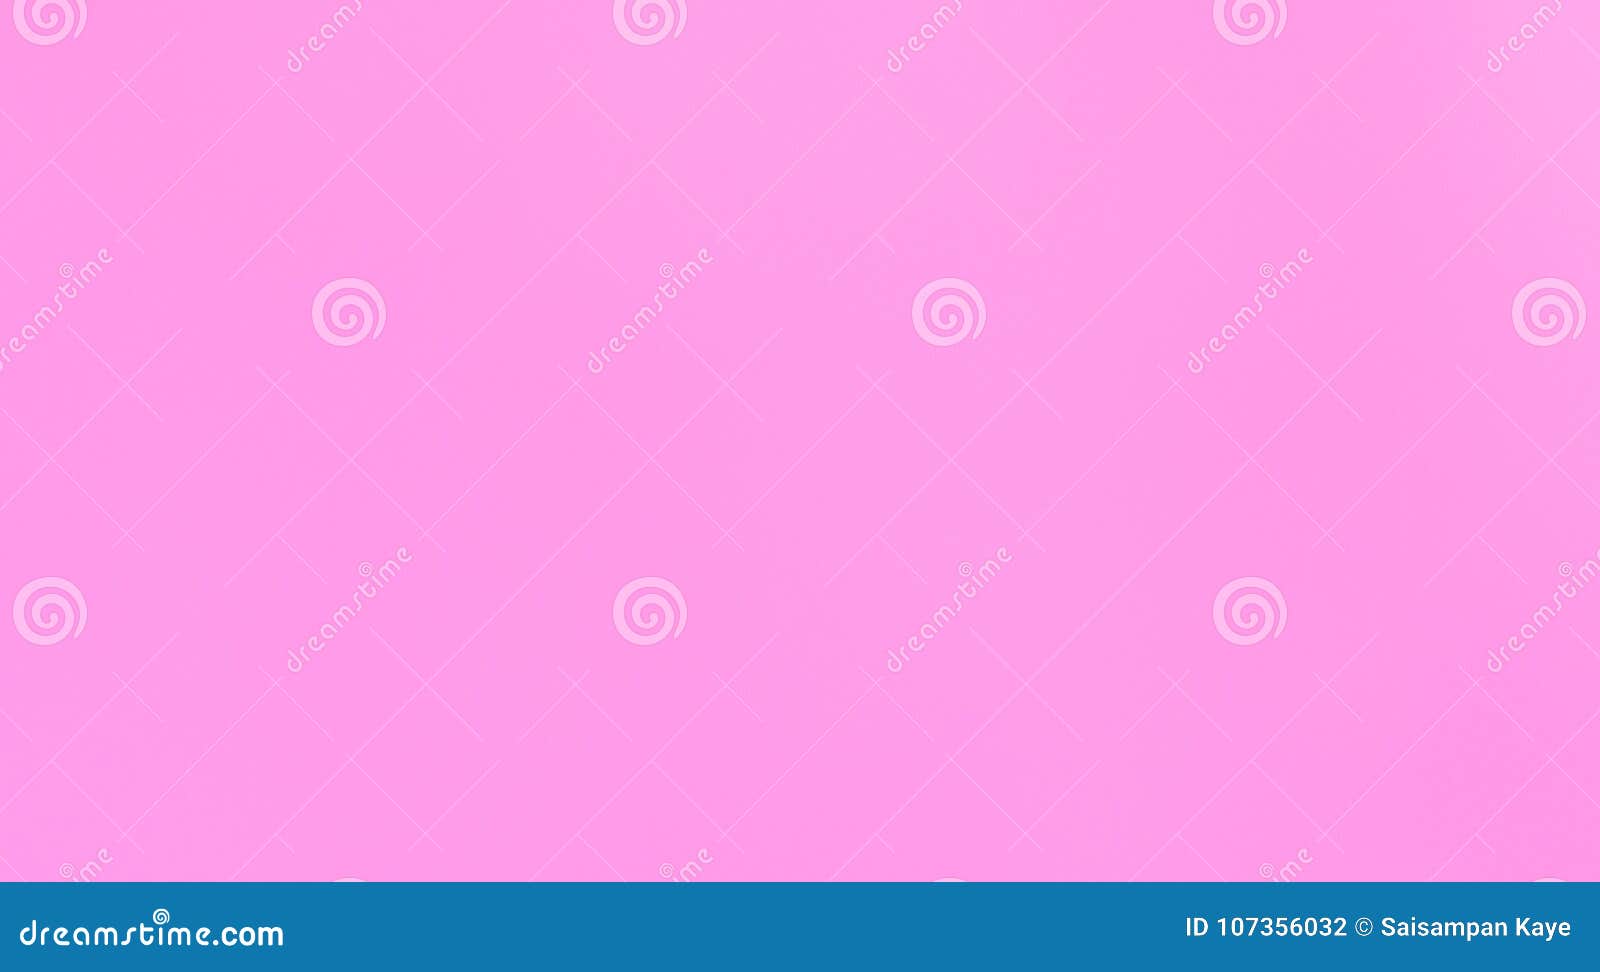 Paper Texture with Smooth Pastel Pink Color Perfect for Background